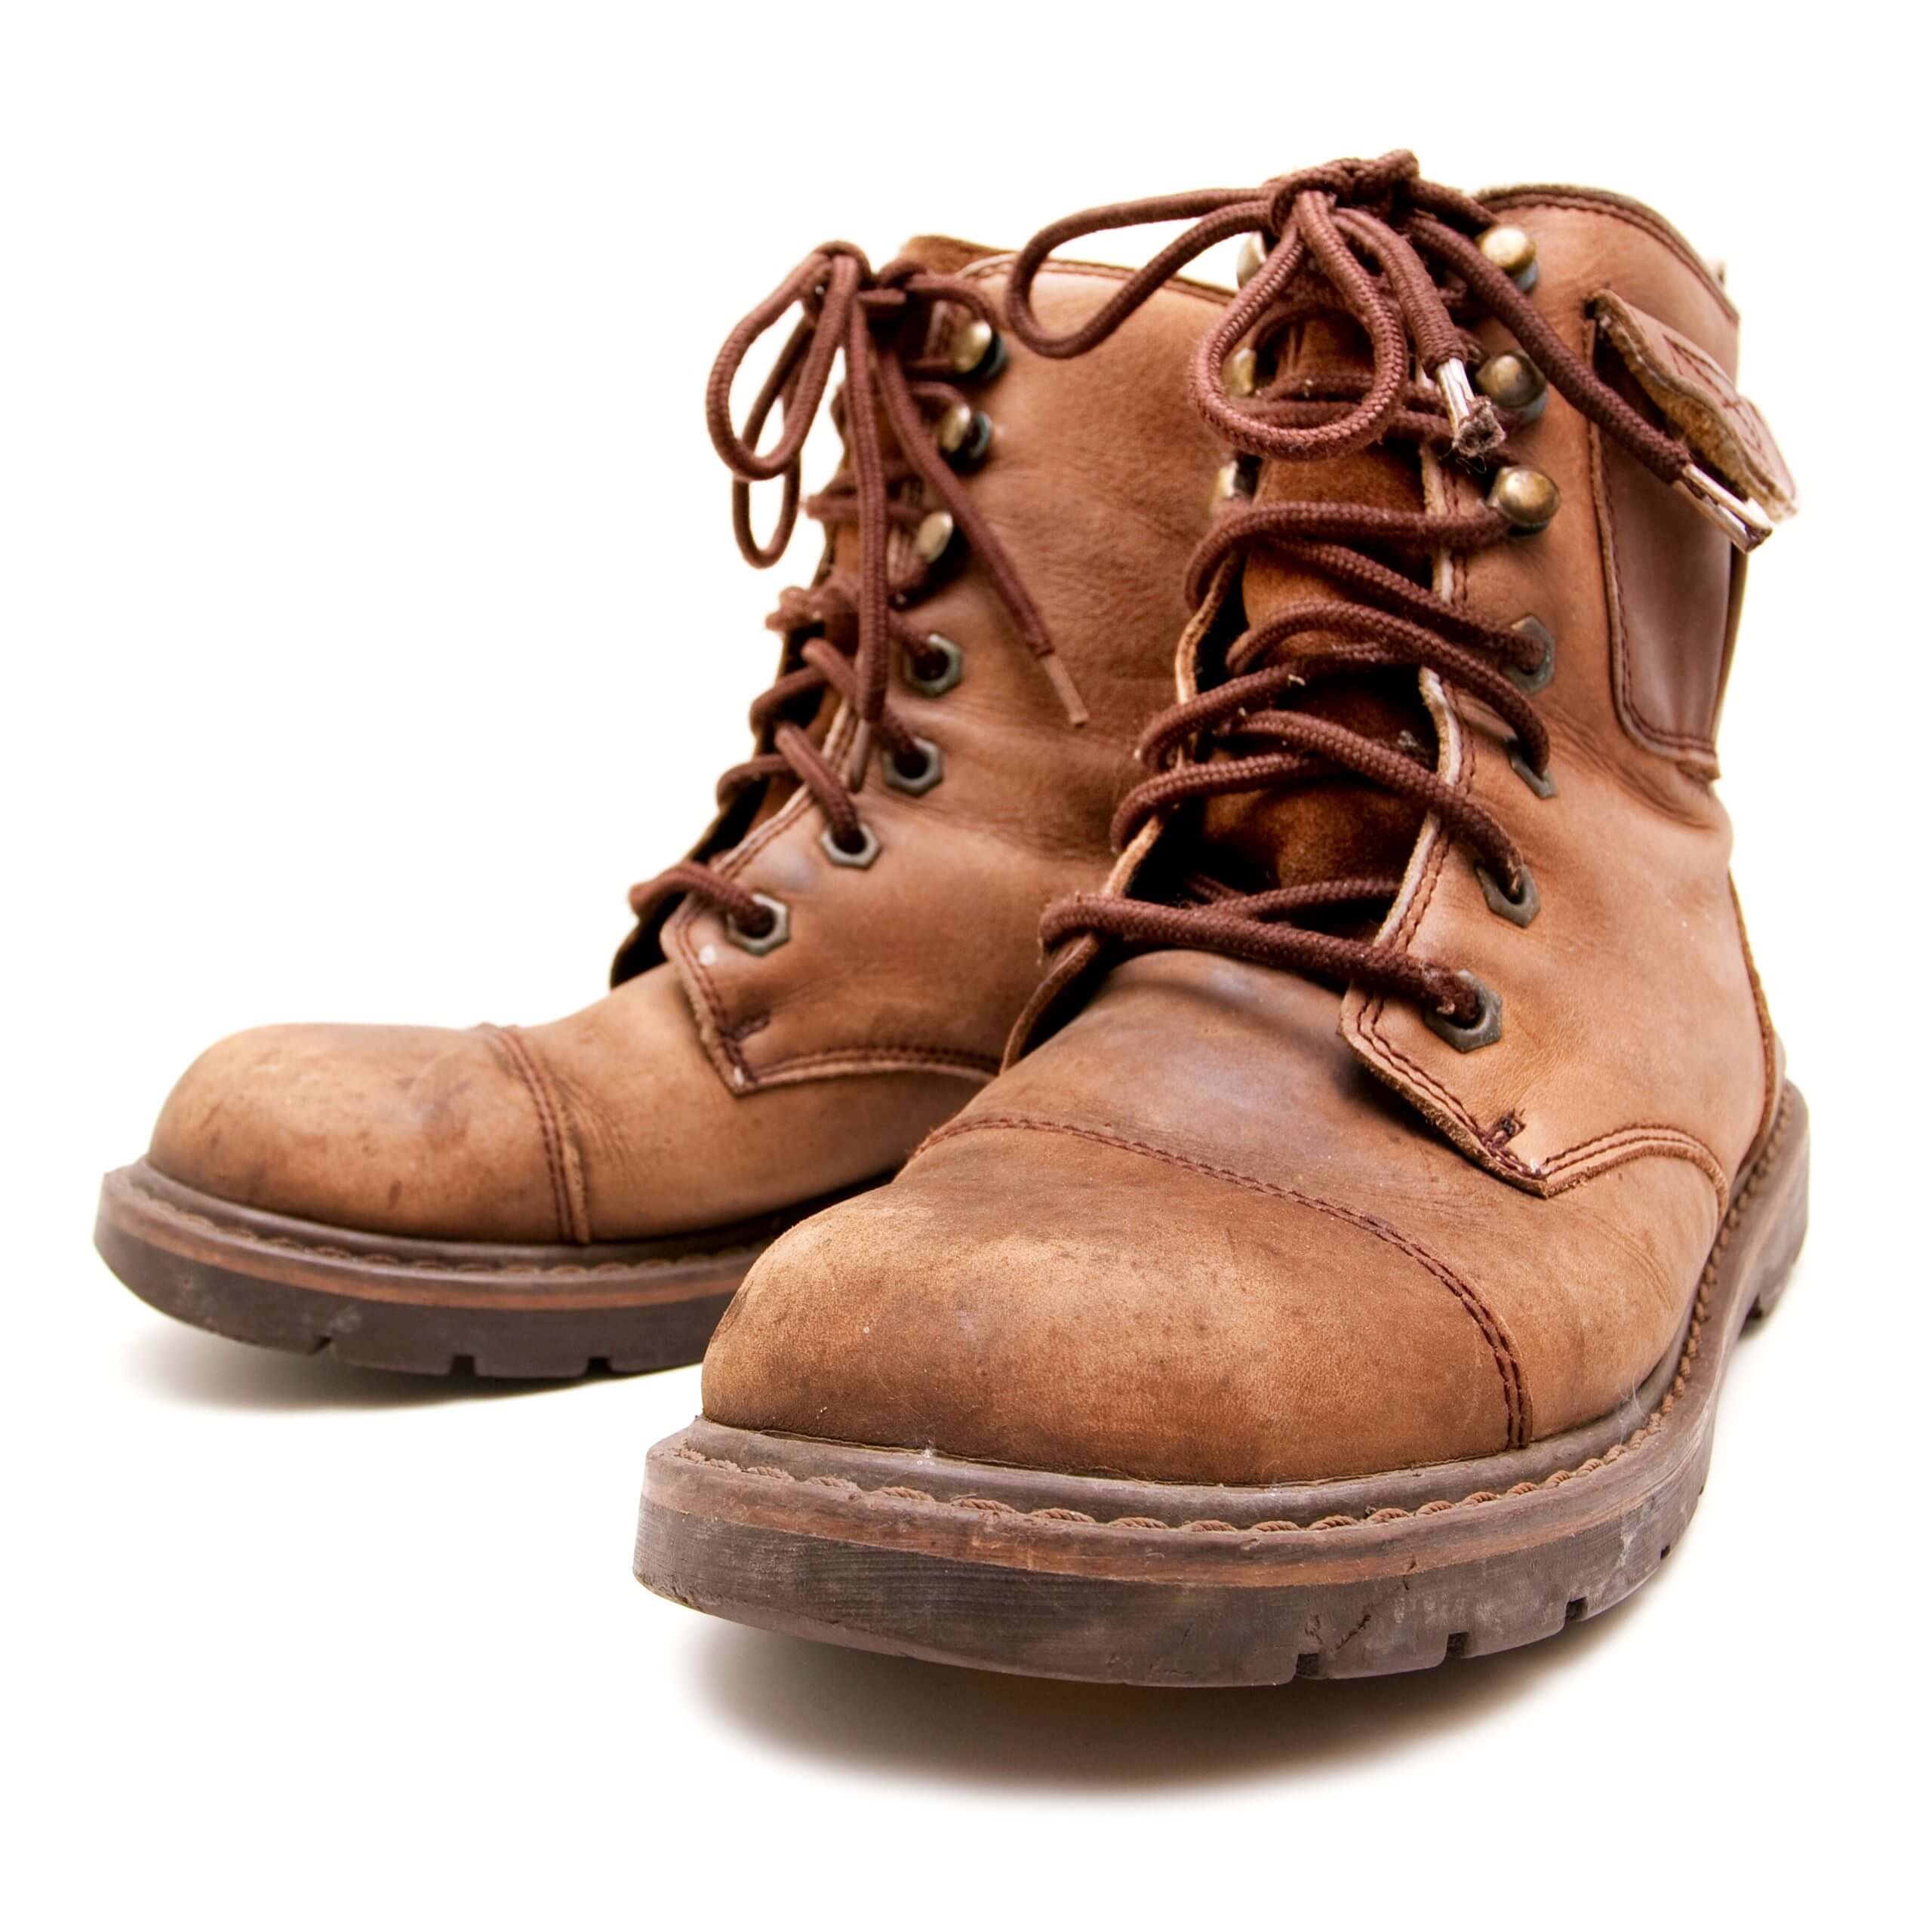 An image of our Industrial Work Boots.